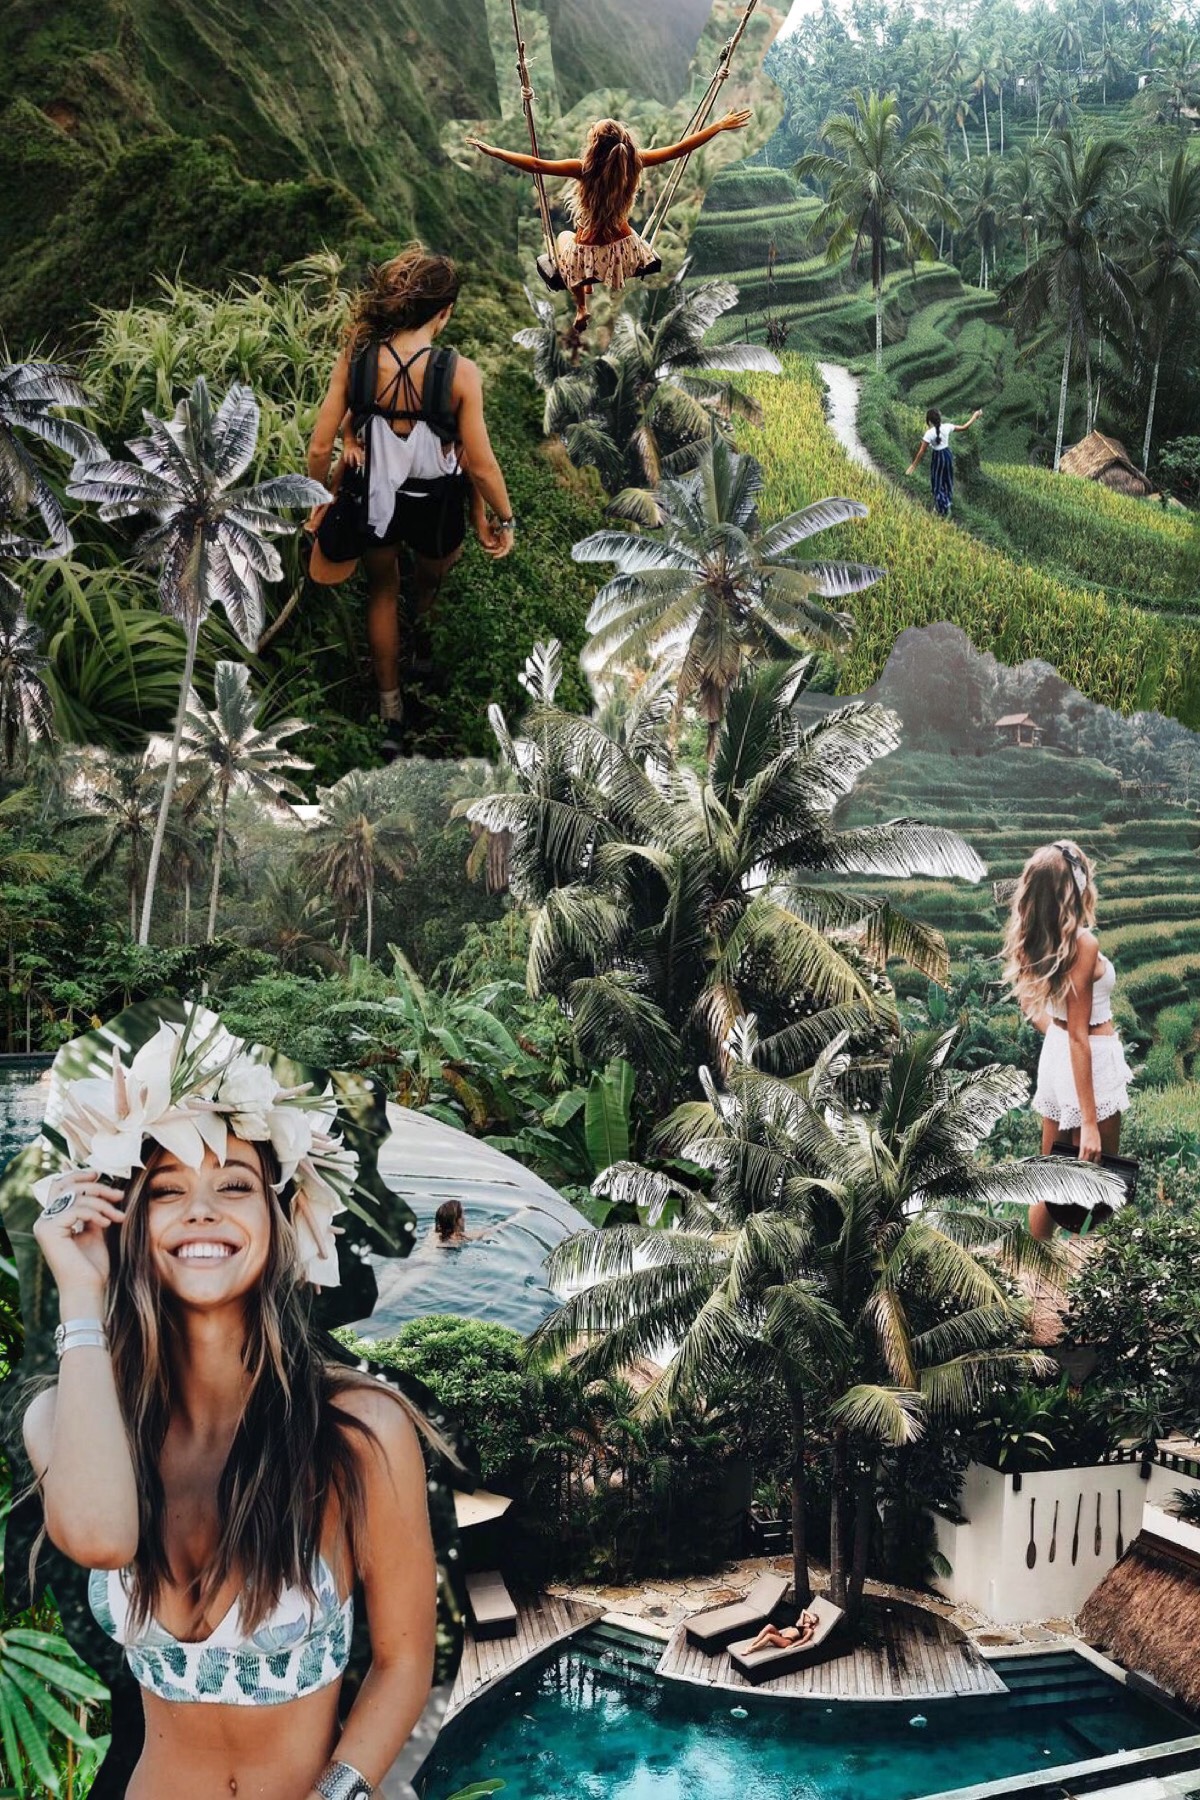 🌴 t a p 🌴
here’s a tropical wanderlust themed collage for you

today’s my birthday! (I’m kinda excited😂) also: happy birthday to @CrashingWaters!